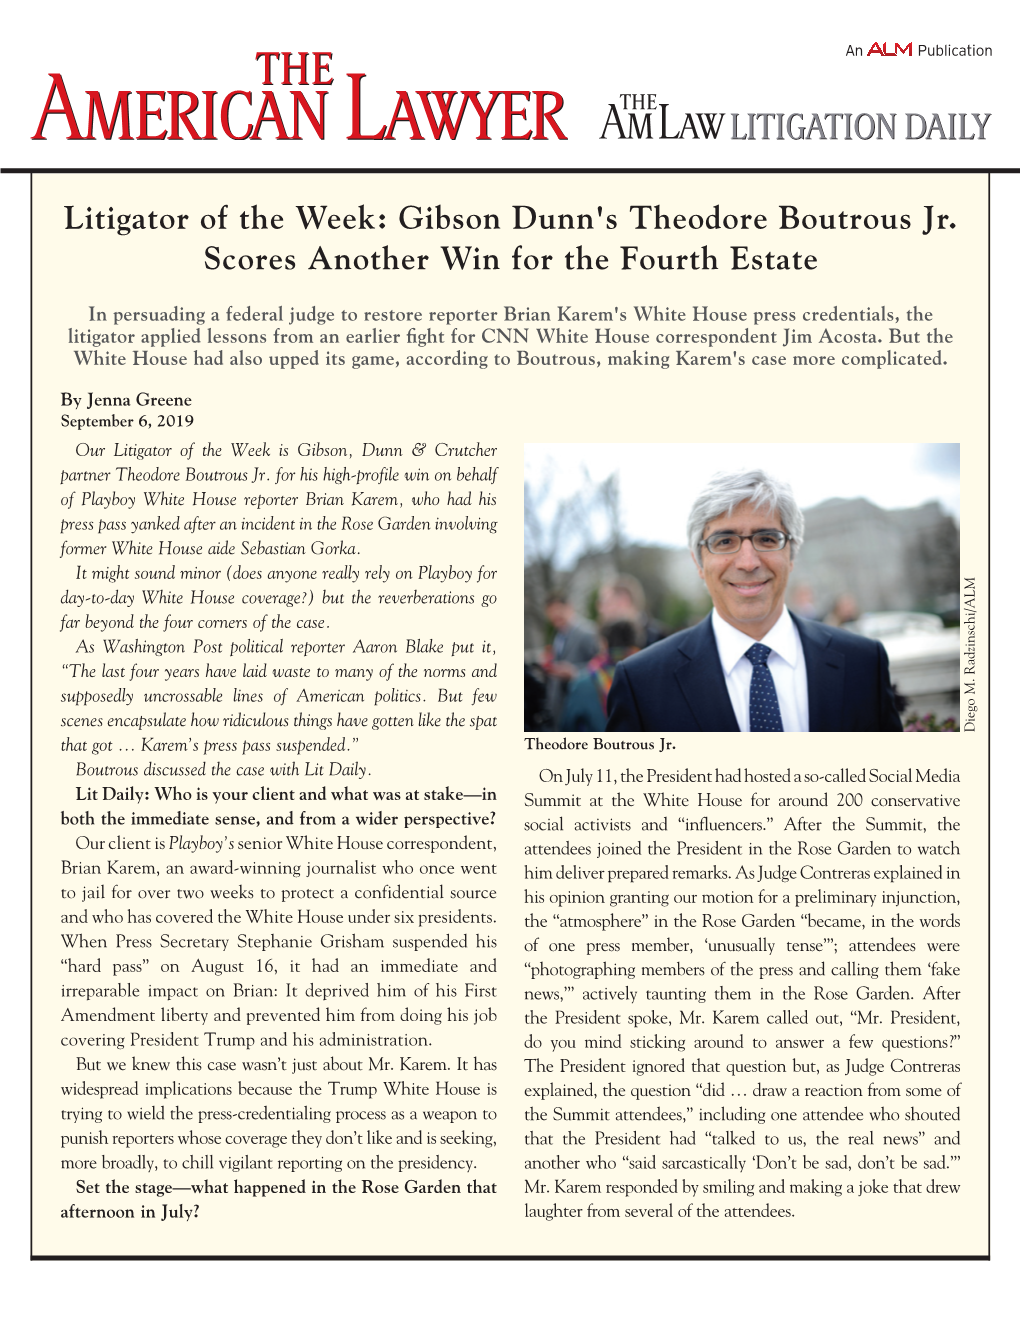 Litigator of the Week: Gibson Dunn's Theodore Boutrous Jr. Scores Another Win for the Fourth Estate